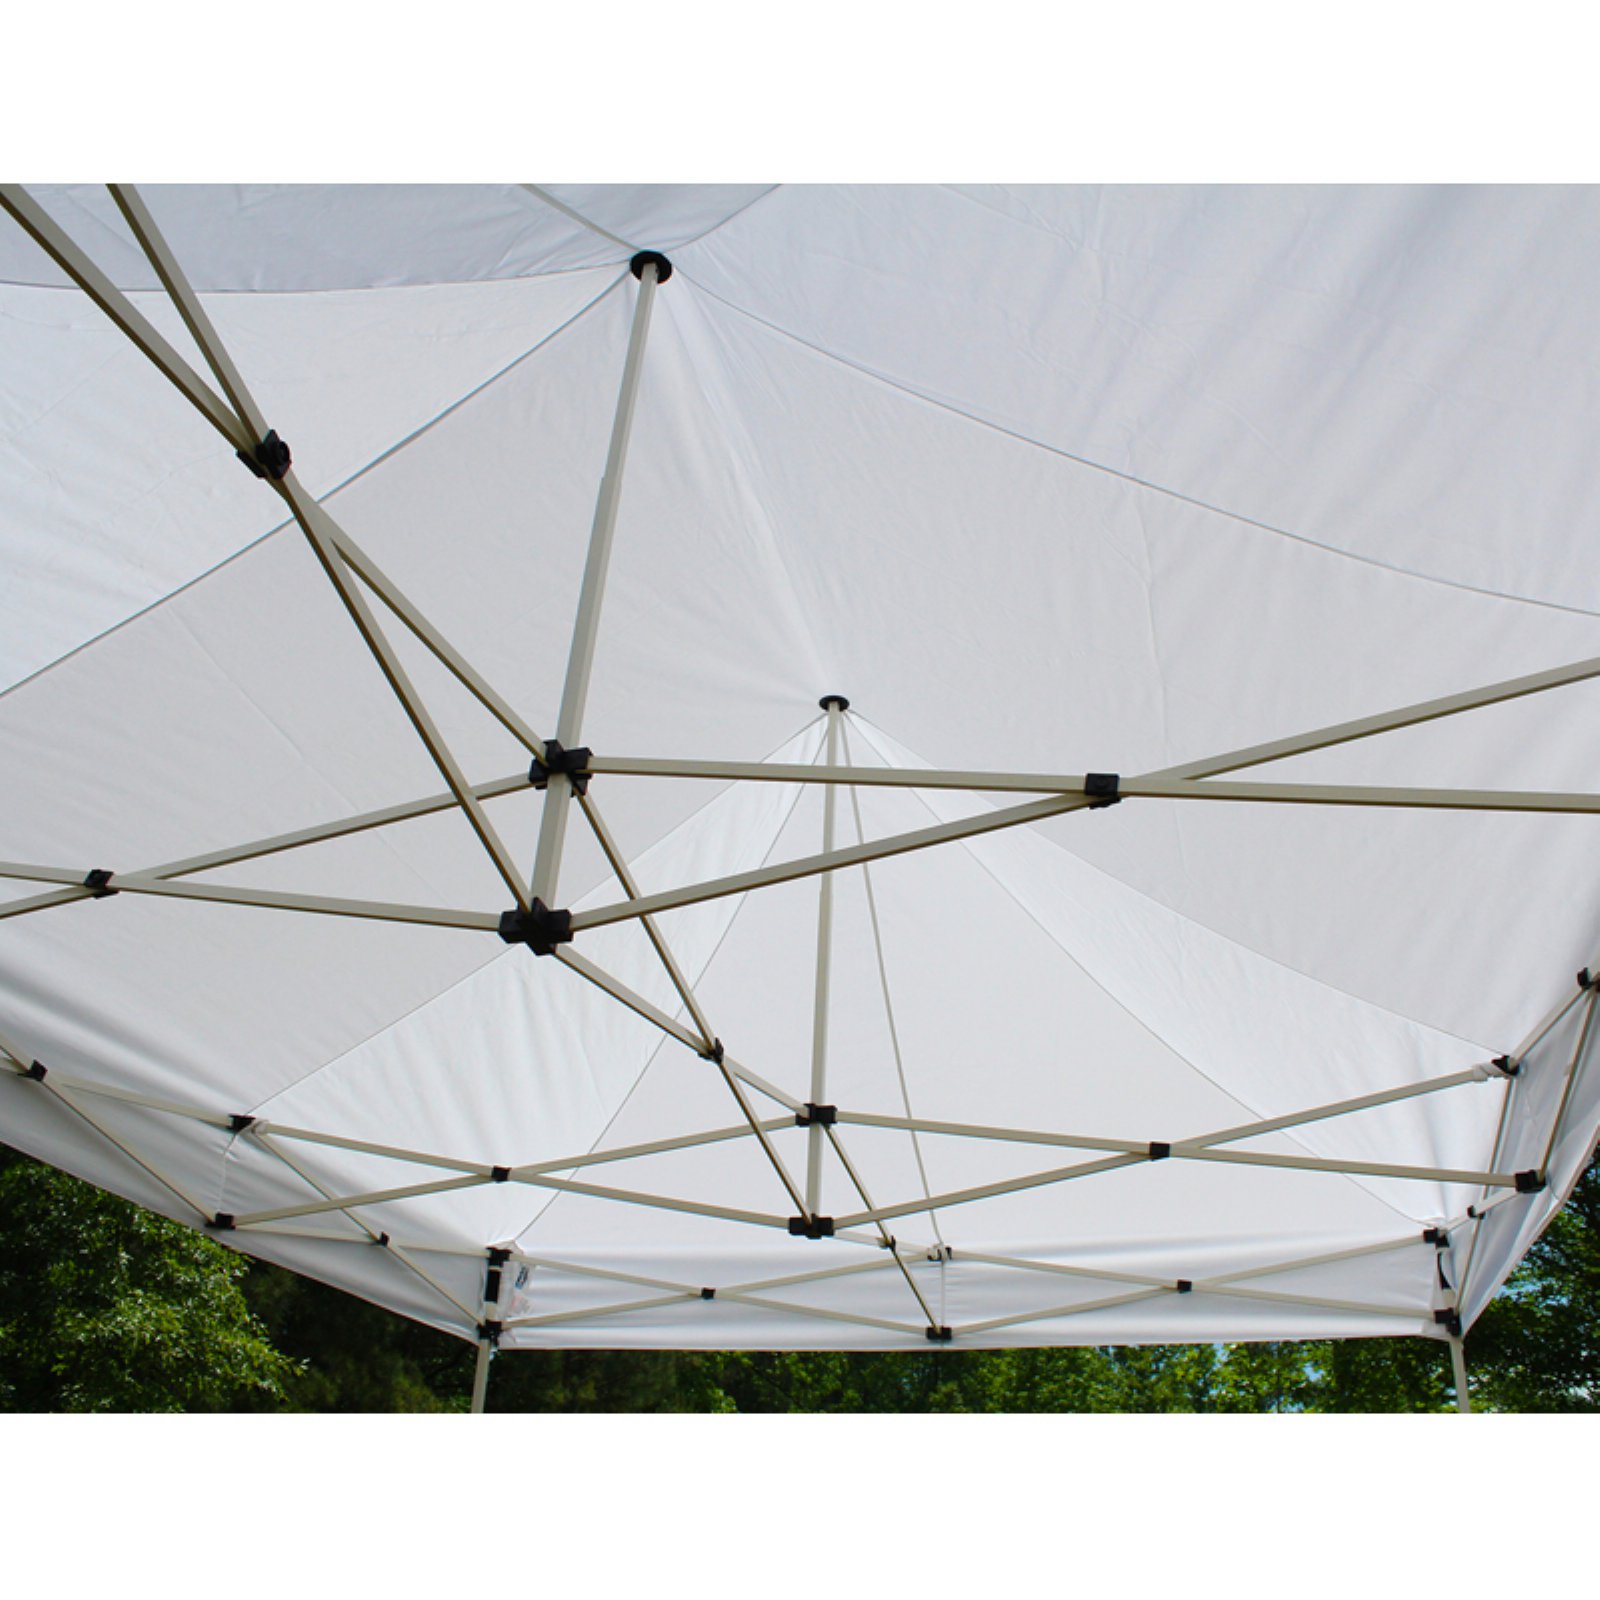 King Canopy FESTIVAL 10X15 Instant Pop Up Tent w/ WHITE Cover - image 5 of 5